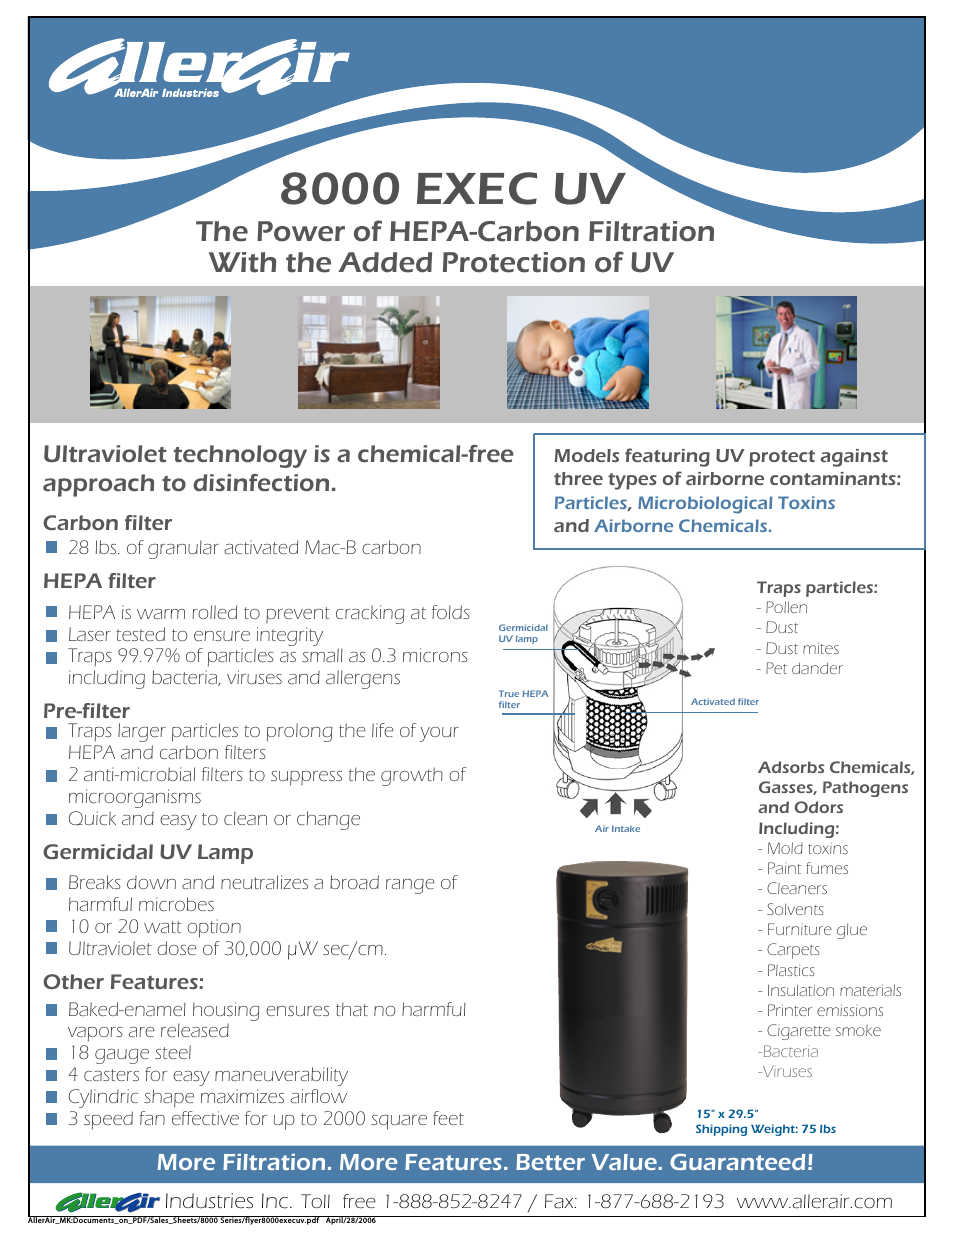 The Power of HEPA-Carbon Filtration 8000 Exec UV